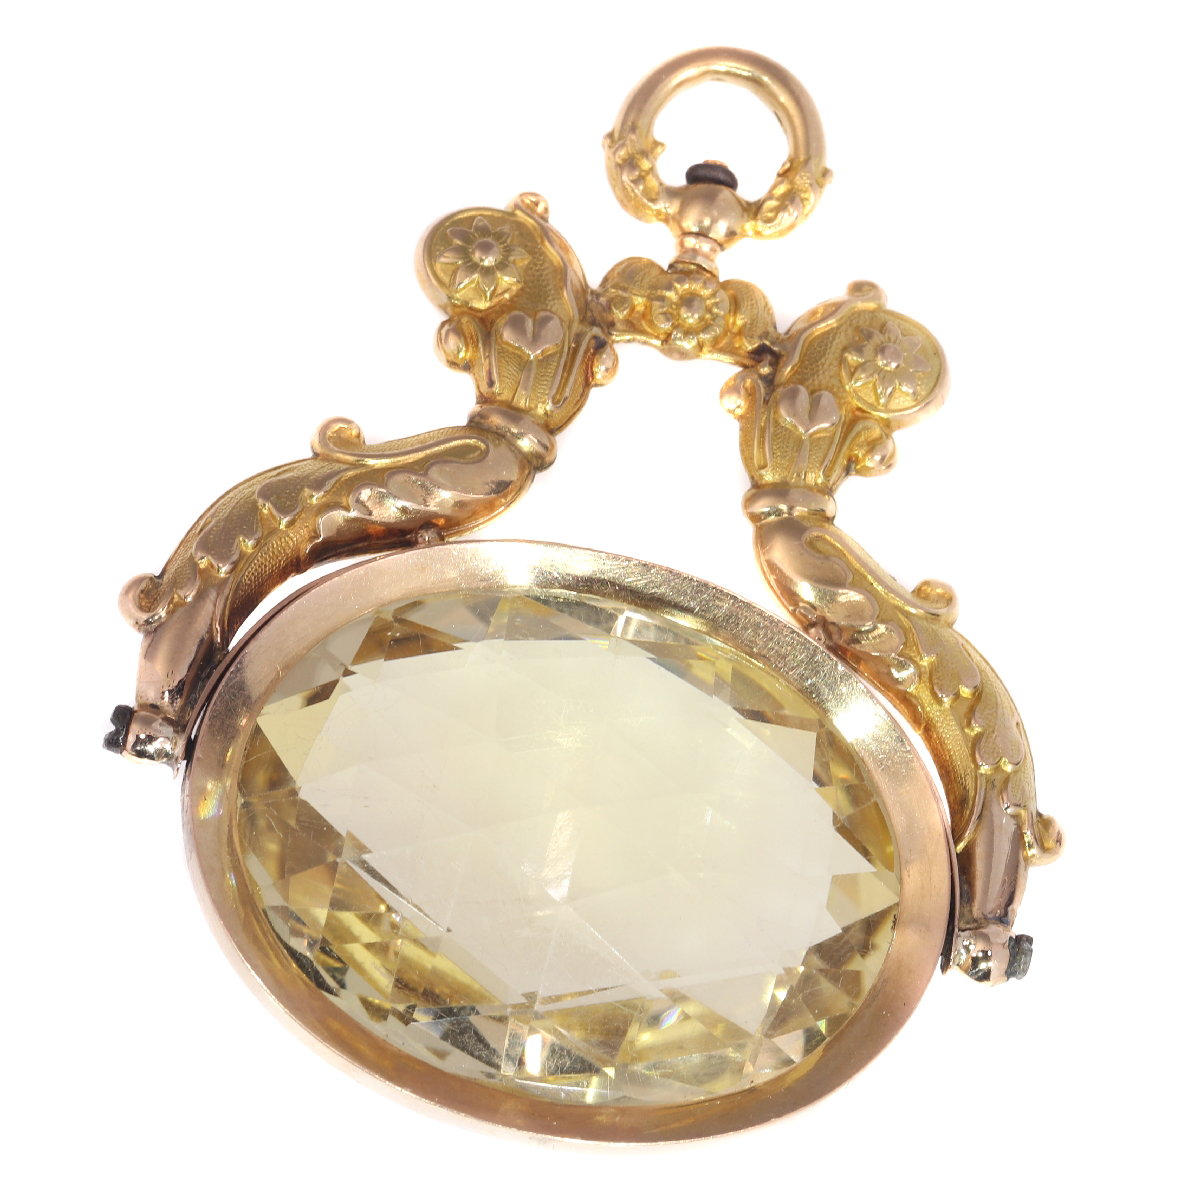 1820 s Elegance: Belgian Red Gold Pendant with 105ct Citrine